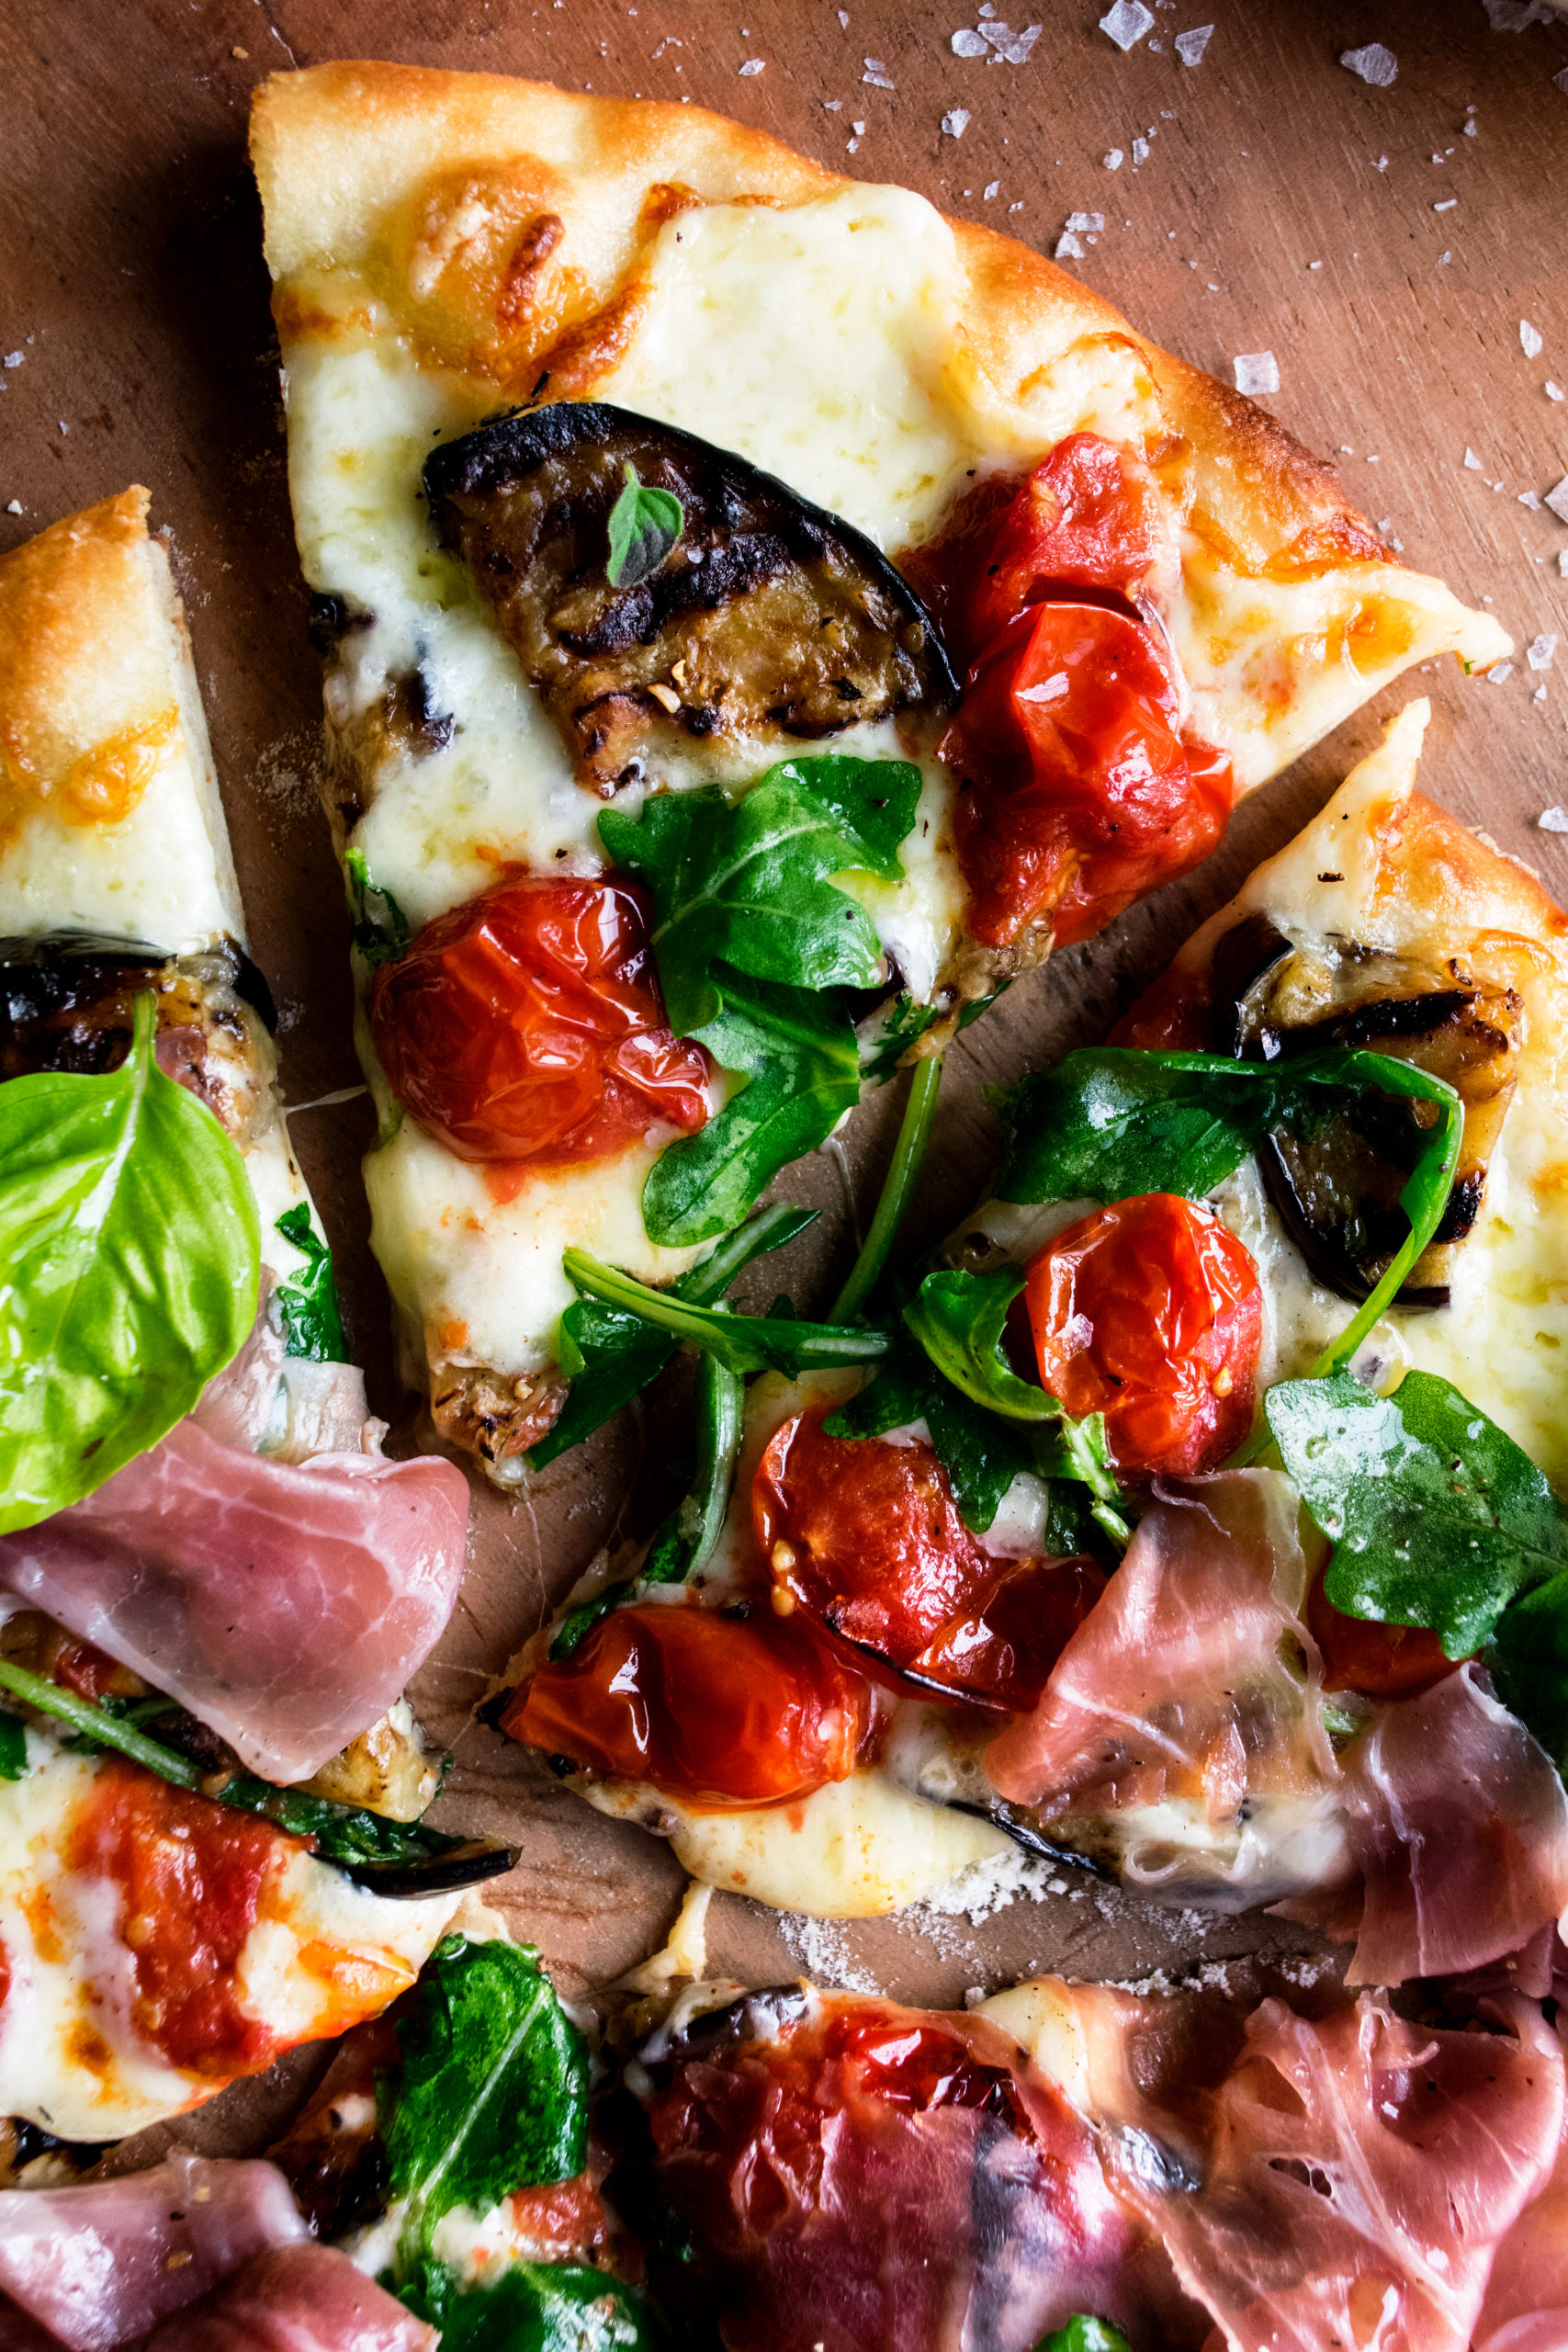 Grilled Pizzas with Eggplant & Prosciutto - The Original Dish